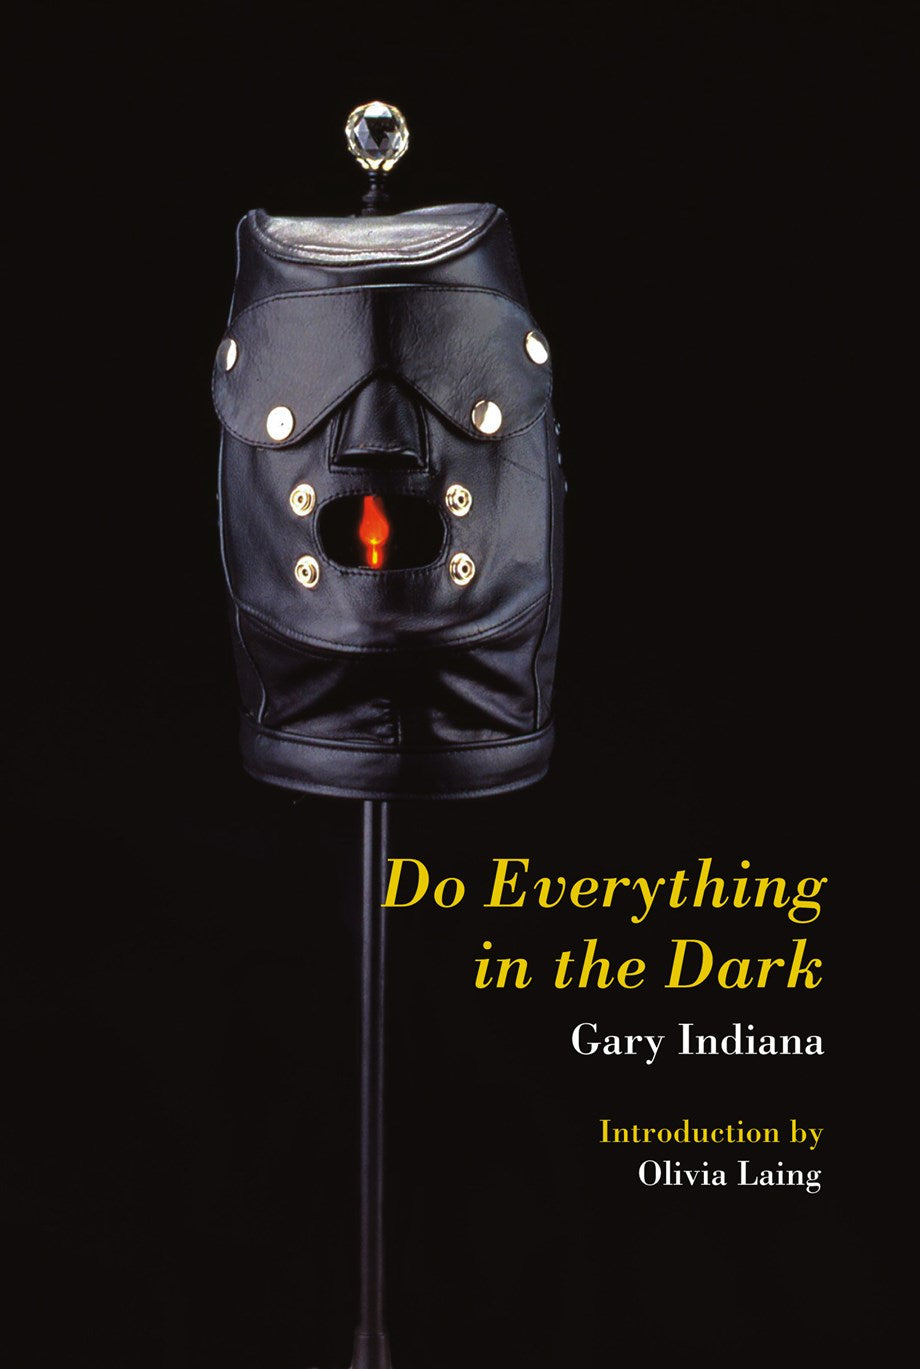 Do Everything in the Dark by Gary Indiana (Introduction by Olivia Laing)